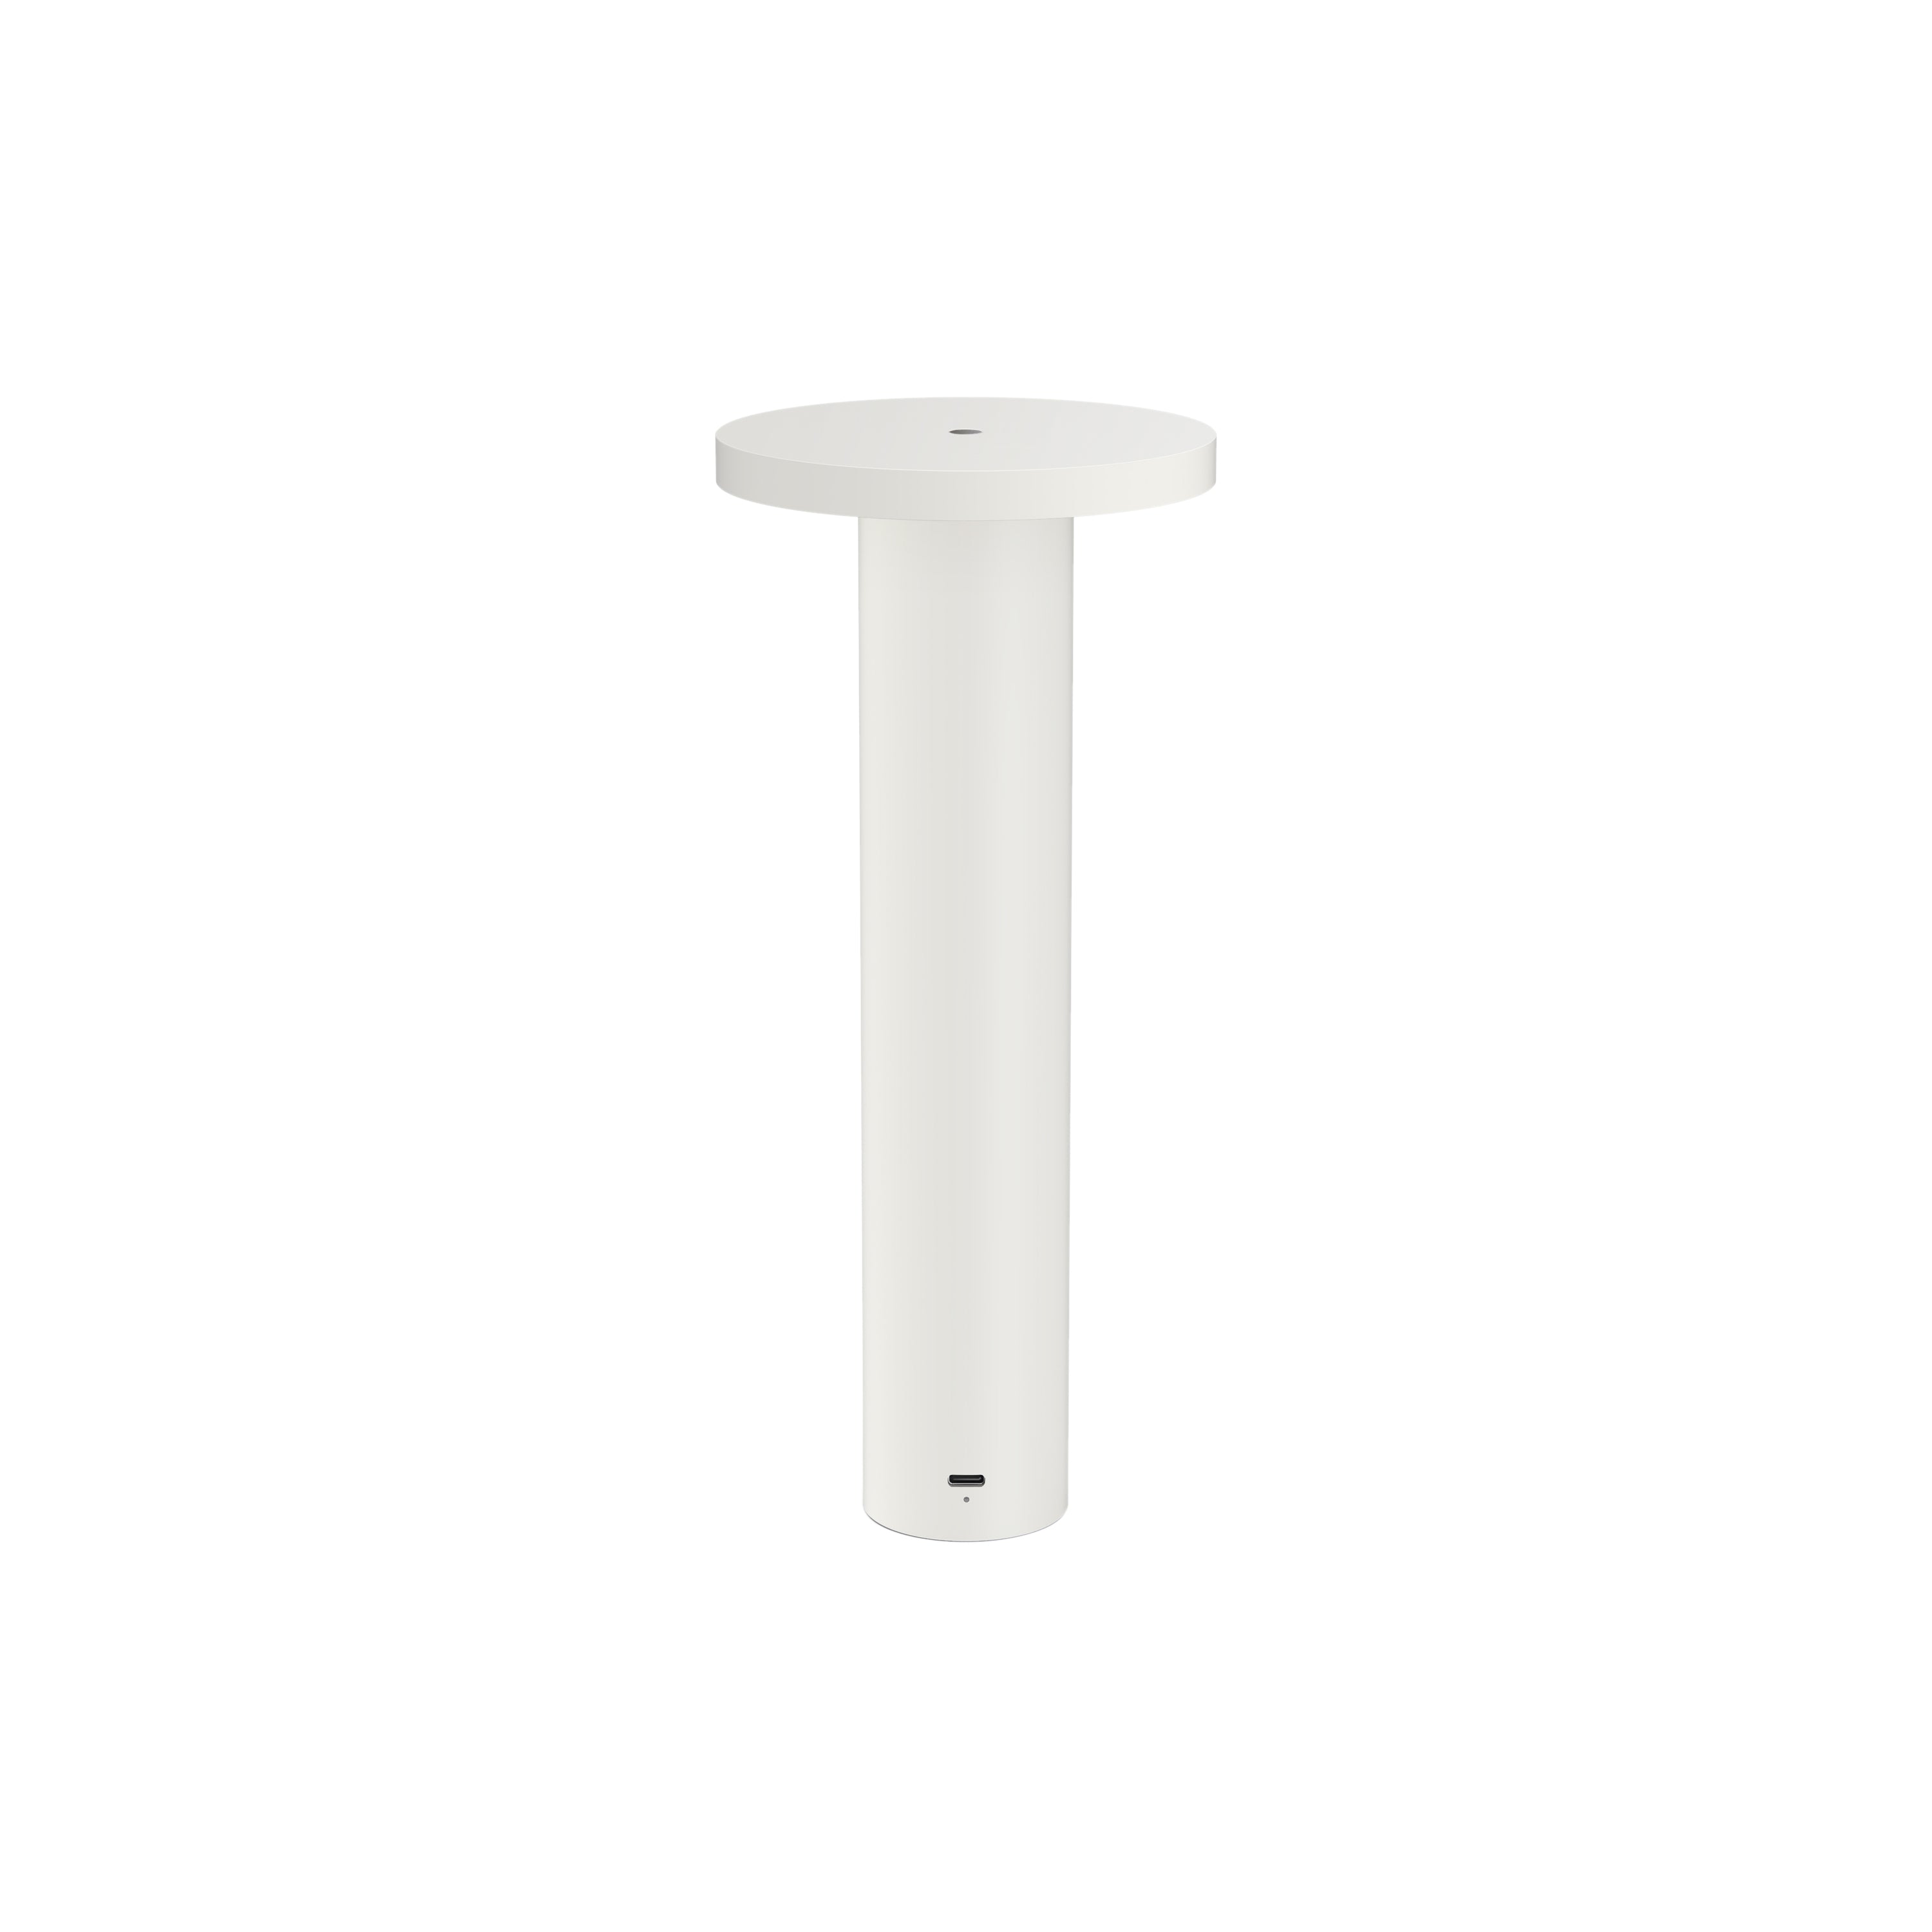 Luci Table Lamp: White